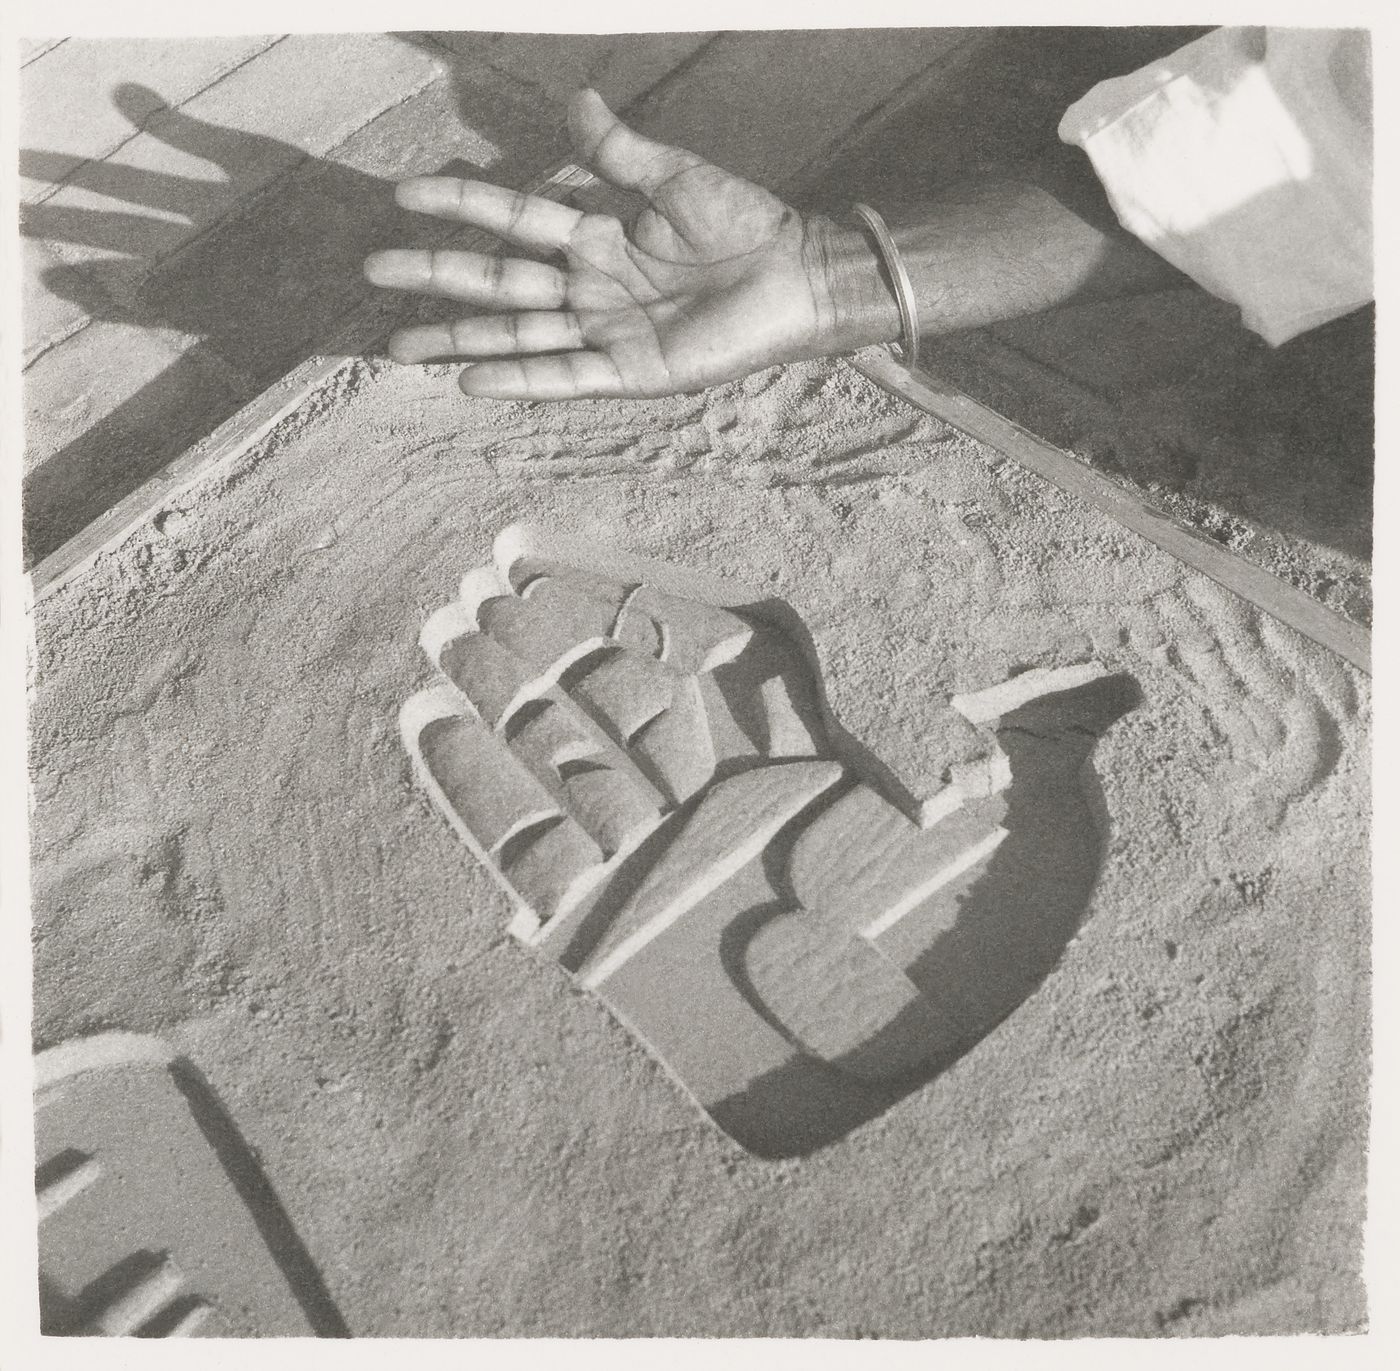 Photographs of an imprint of a hand in sand in Chandigarh, India